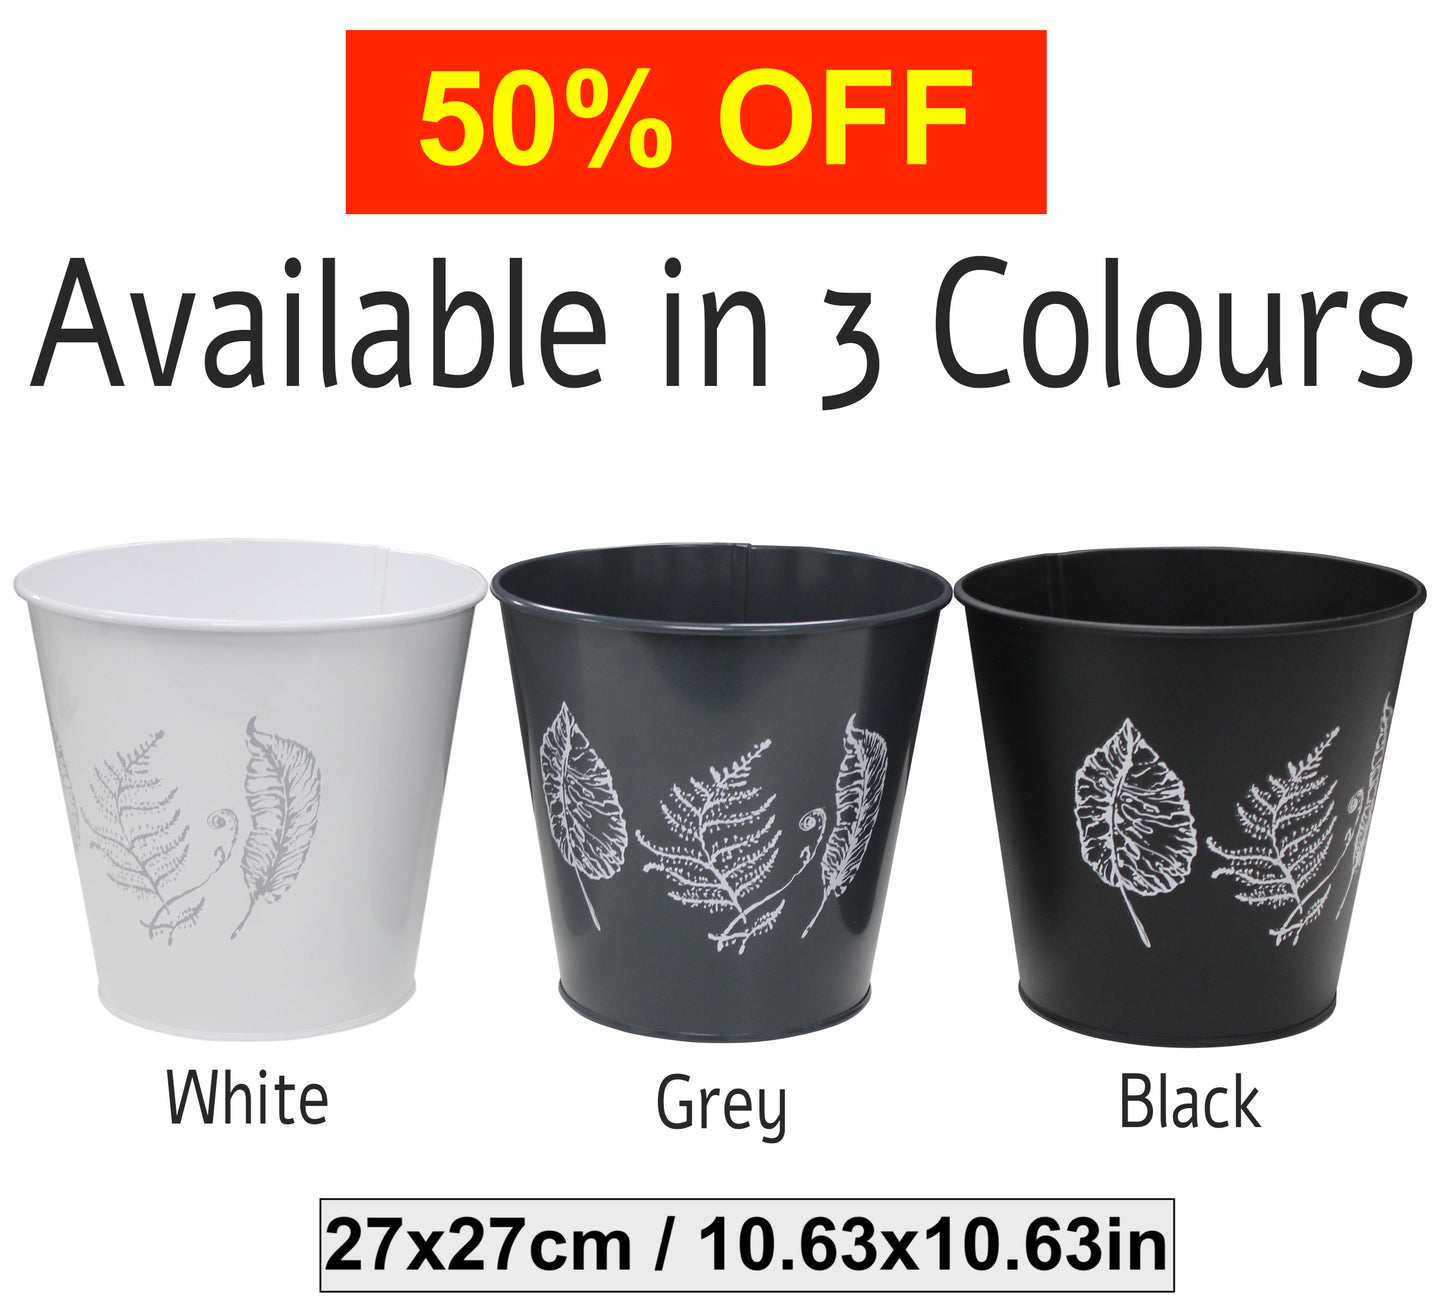 Galvanised Planters with Leaf Prints, 7 Litres - 3 Colours Available